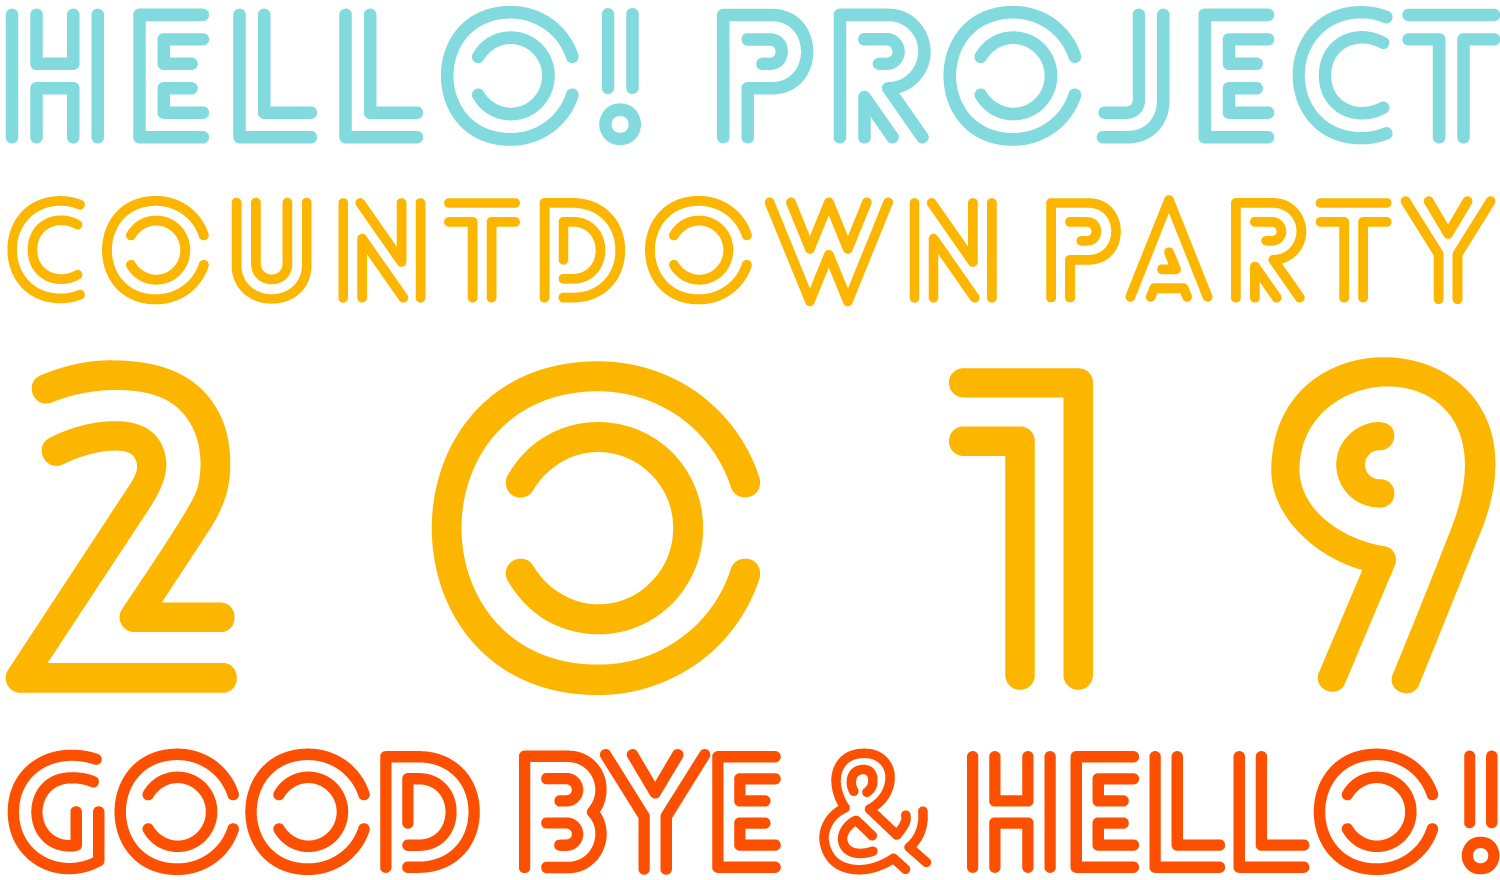 Hello! Project COUNTDOWN PARTY 2019 ~GOOD BYE & HELLO 